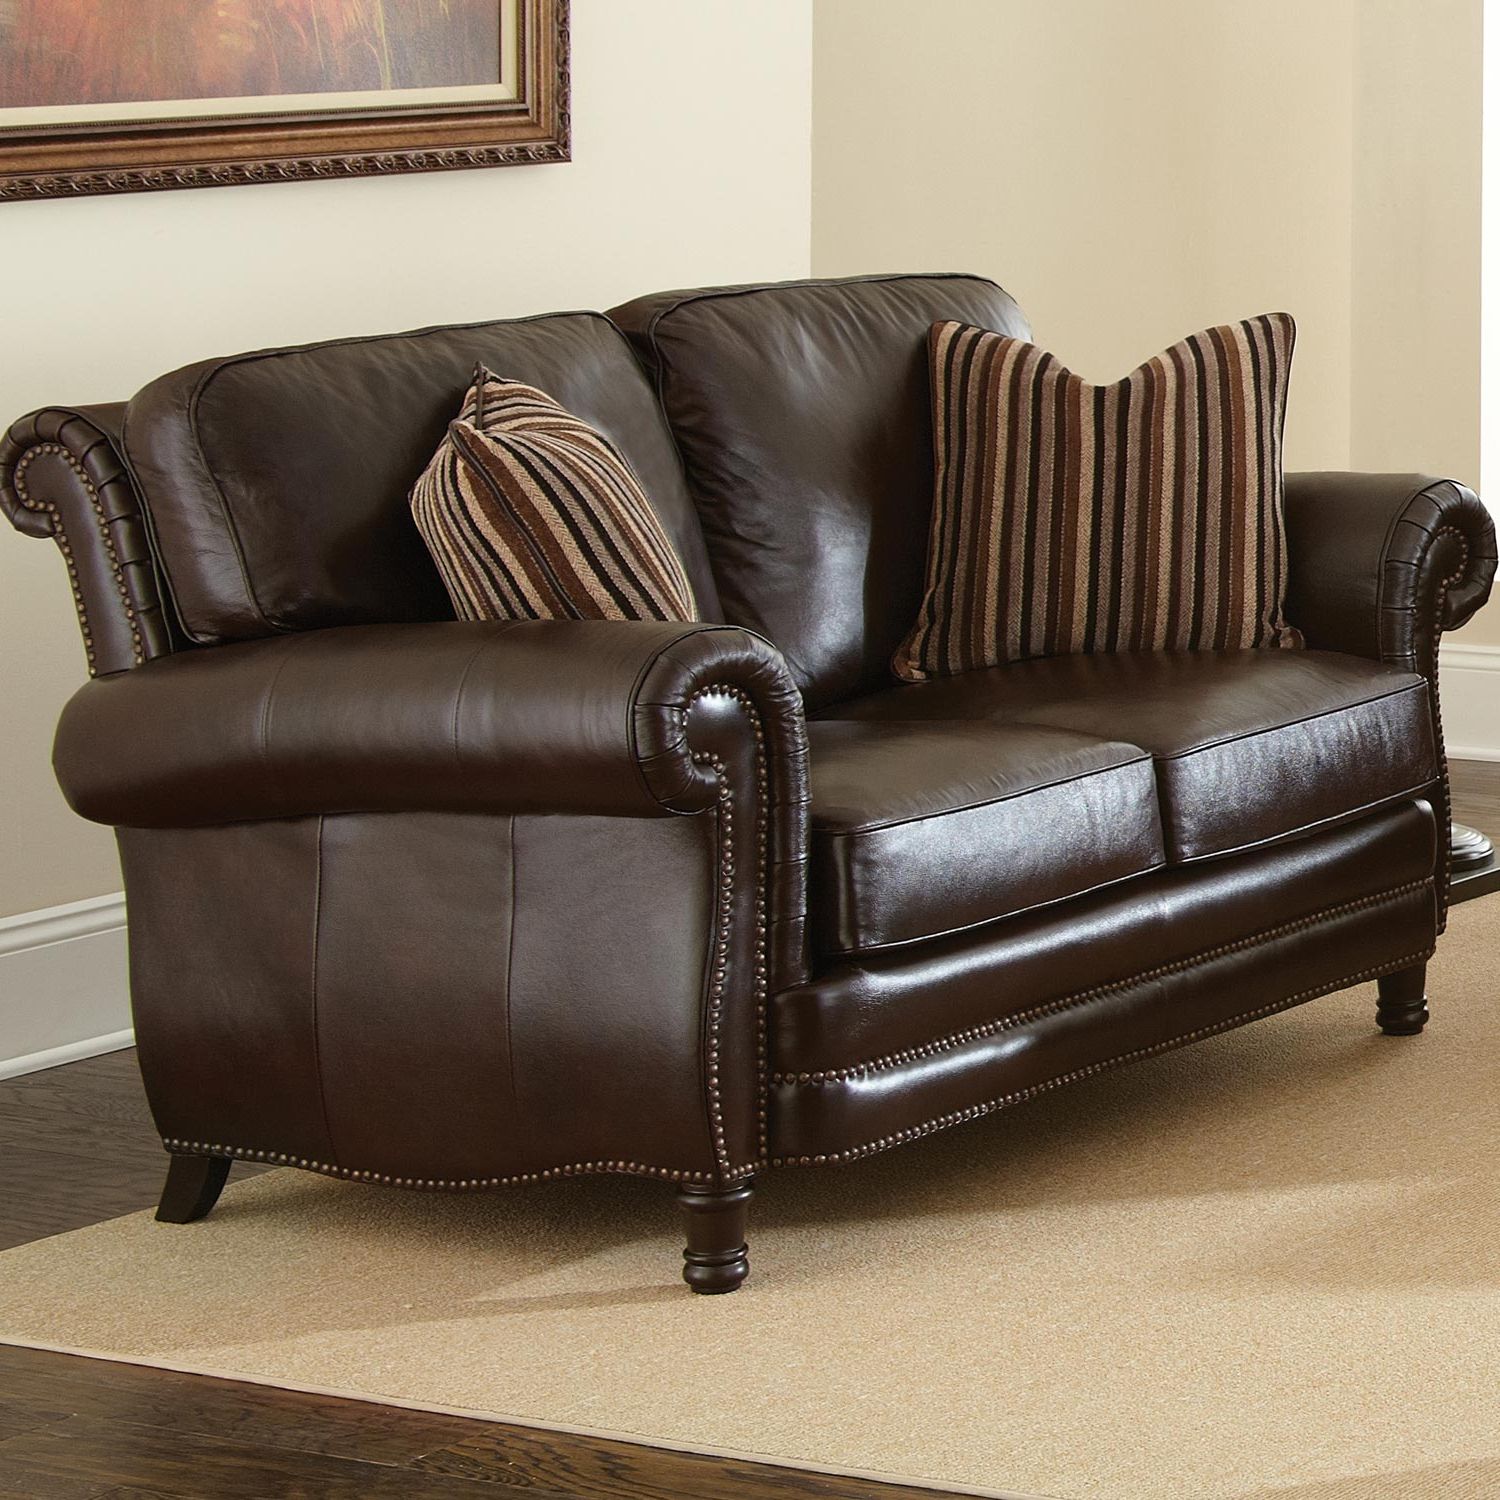 Faux Leather Sofas In Chocolate Brown Pertaining To Most Popular Chateau 3 Piece Leather Sofa Set – Antique Chocolate Brown (Photo 12 of 15)